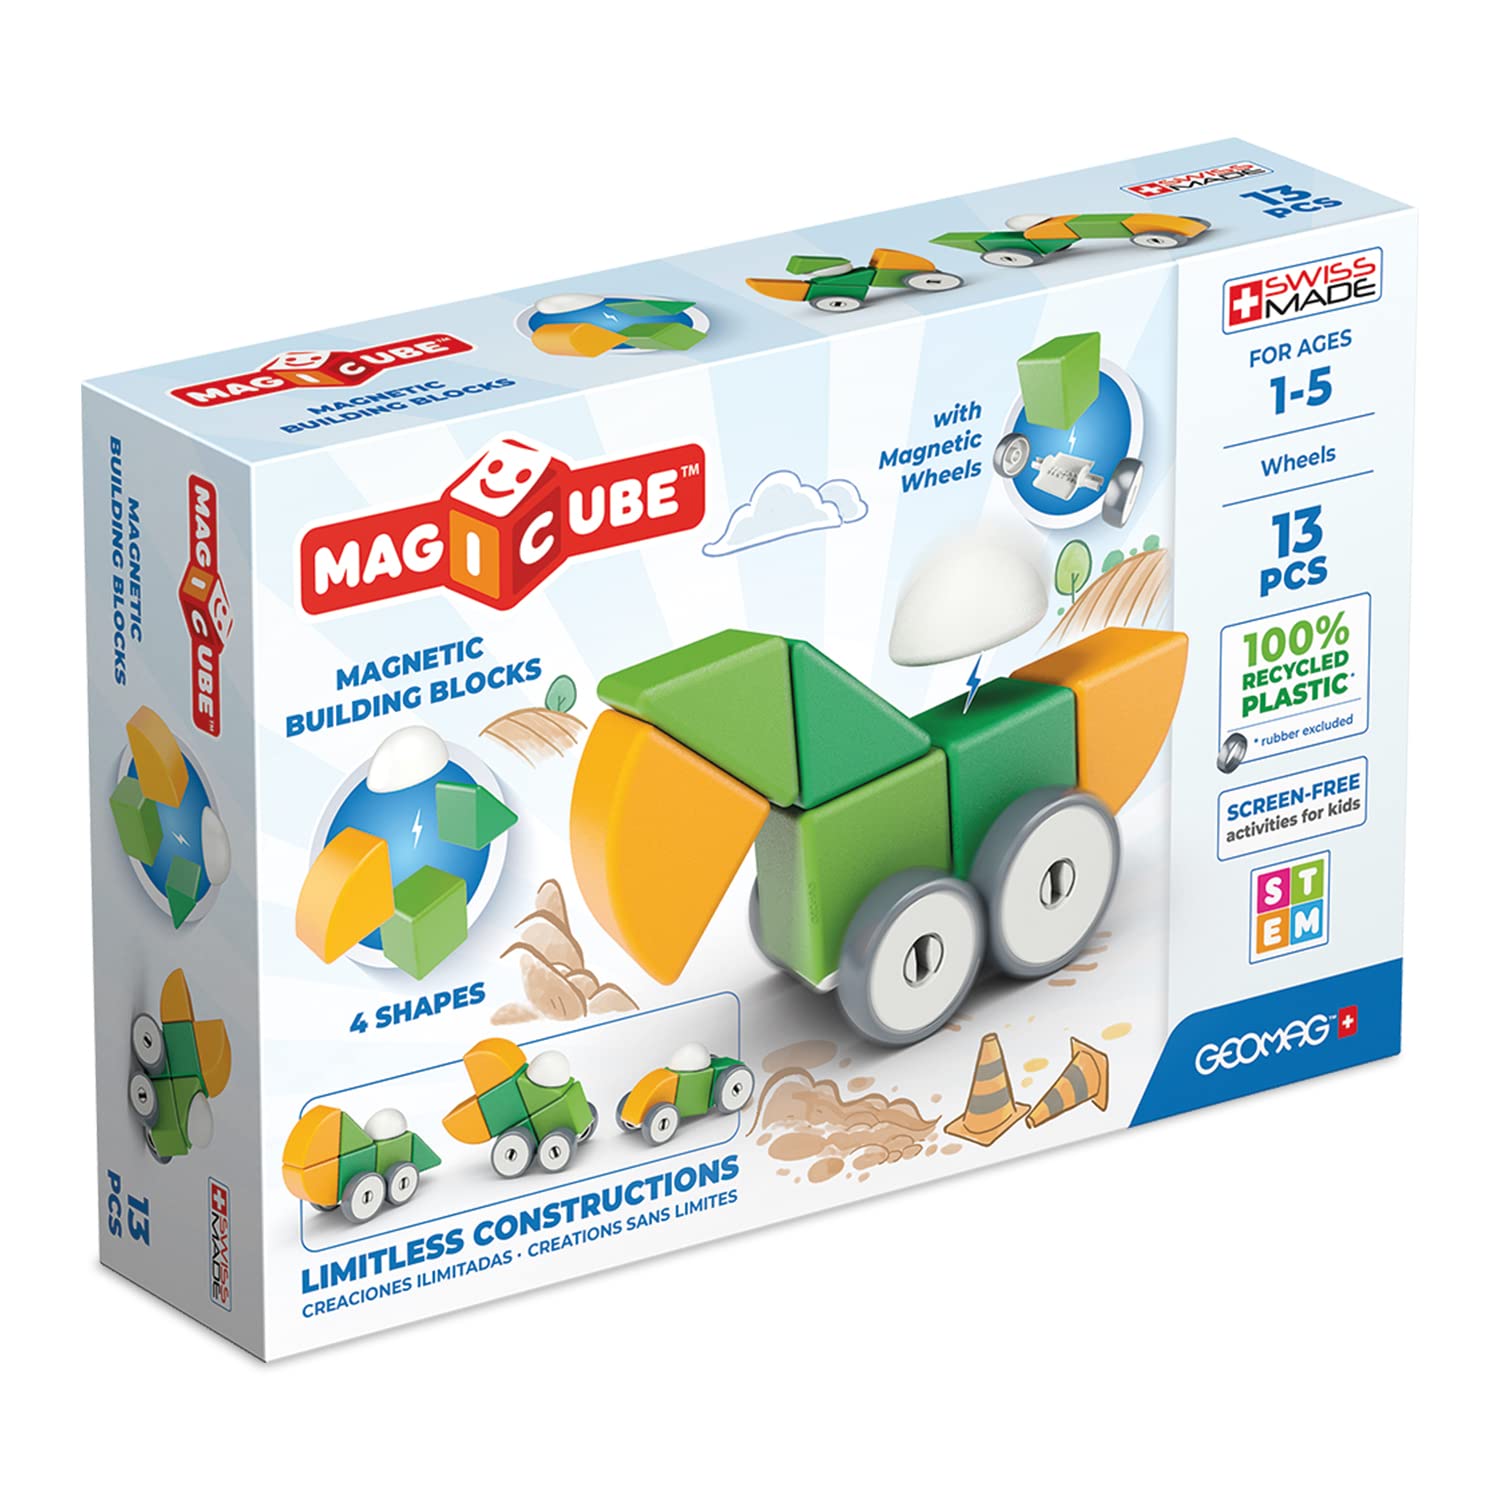 GEOMAG Swiss-Made MagiCube 13-Piece Magnetic Shapes & Wheels Building Set, Cars & Characters, Blocks for Toddlers & Kids Ages 1-5, STEM Montessori Educational Toy, Creativity, Imagination, Learning